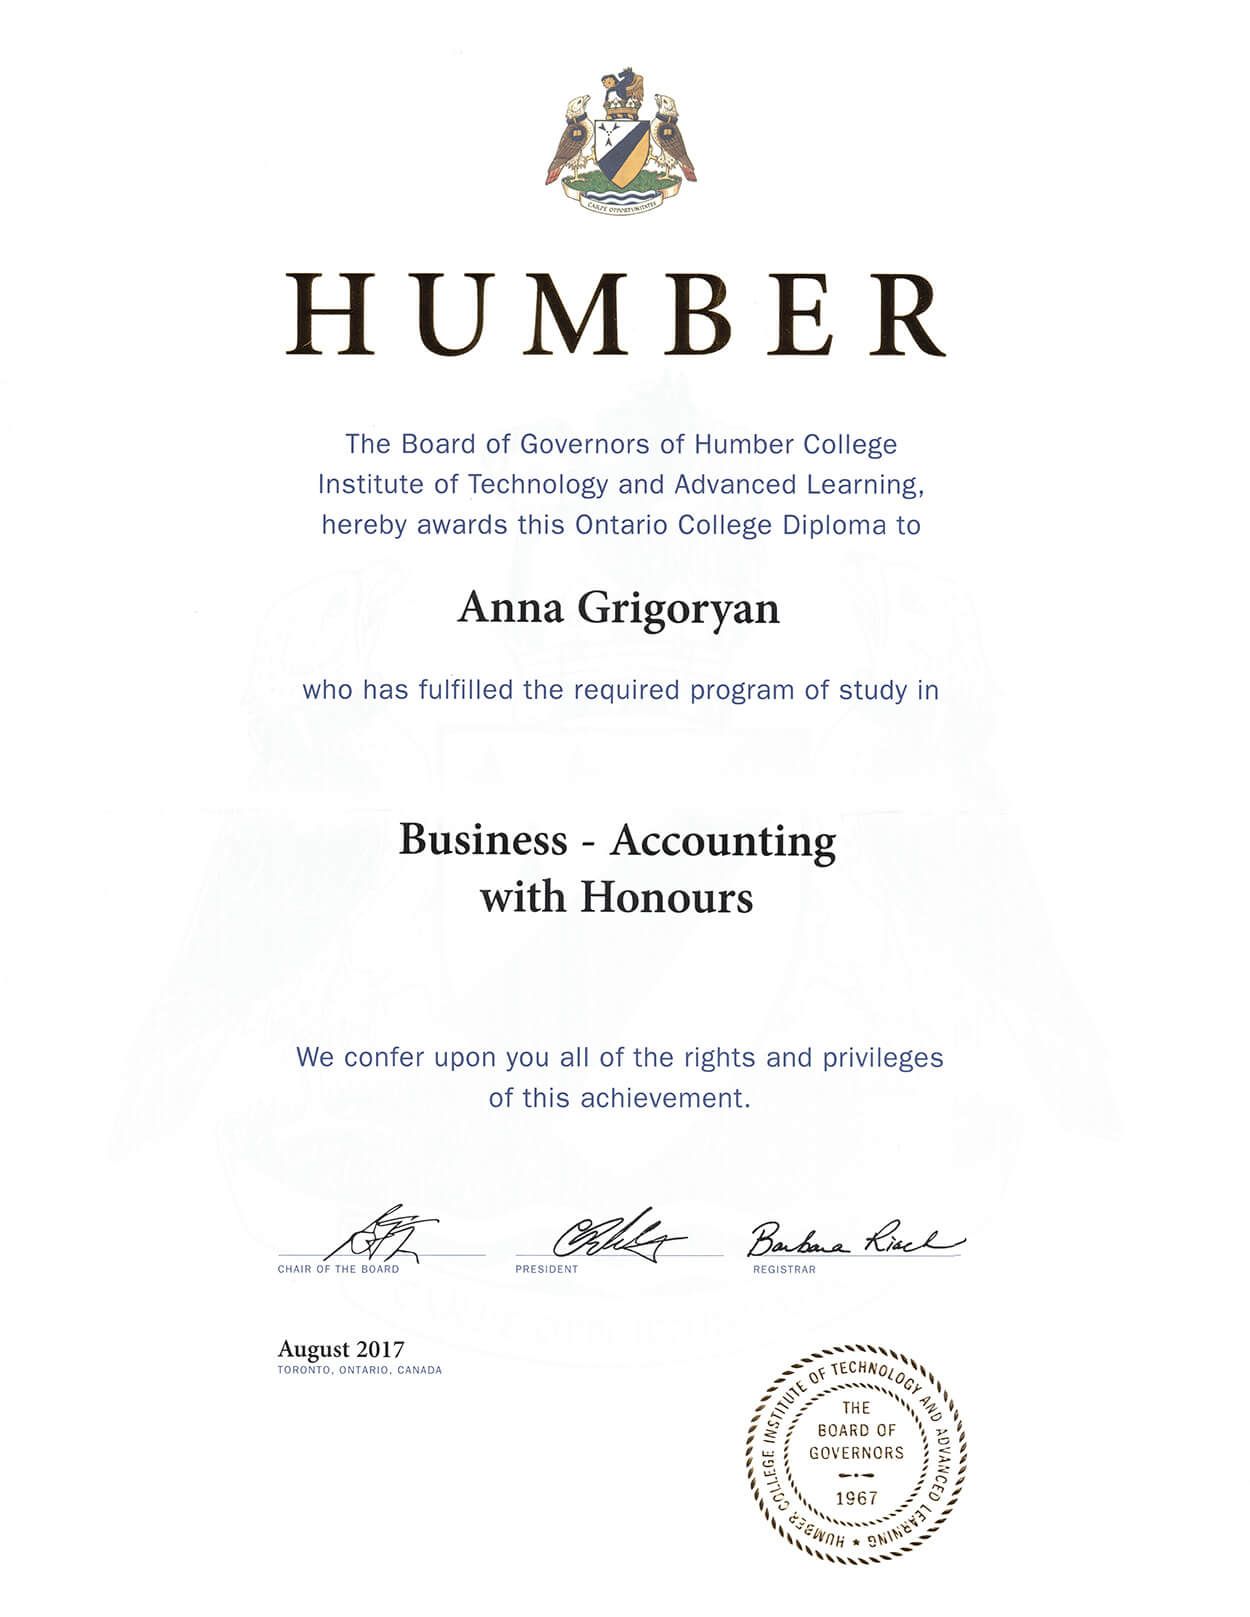 Anna Grigoryan is a corporate accountant, graduated from Humber Business Accounting program with Honors